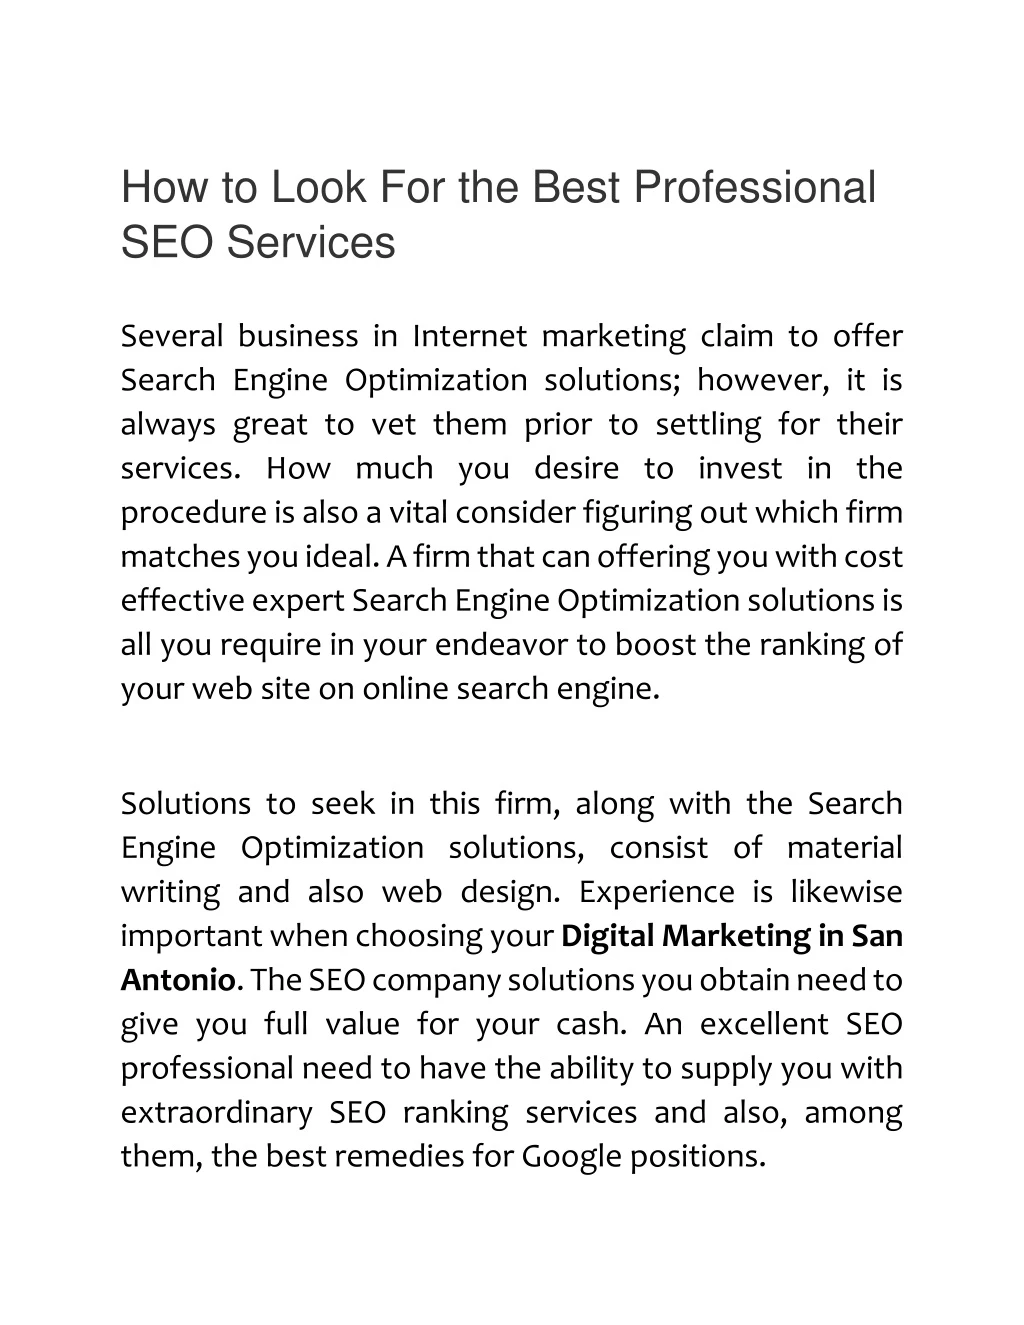 how to look for the best professional seo services